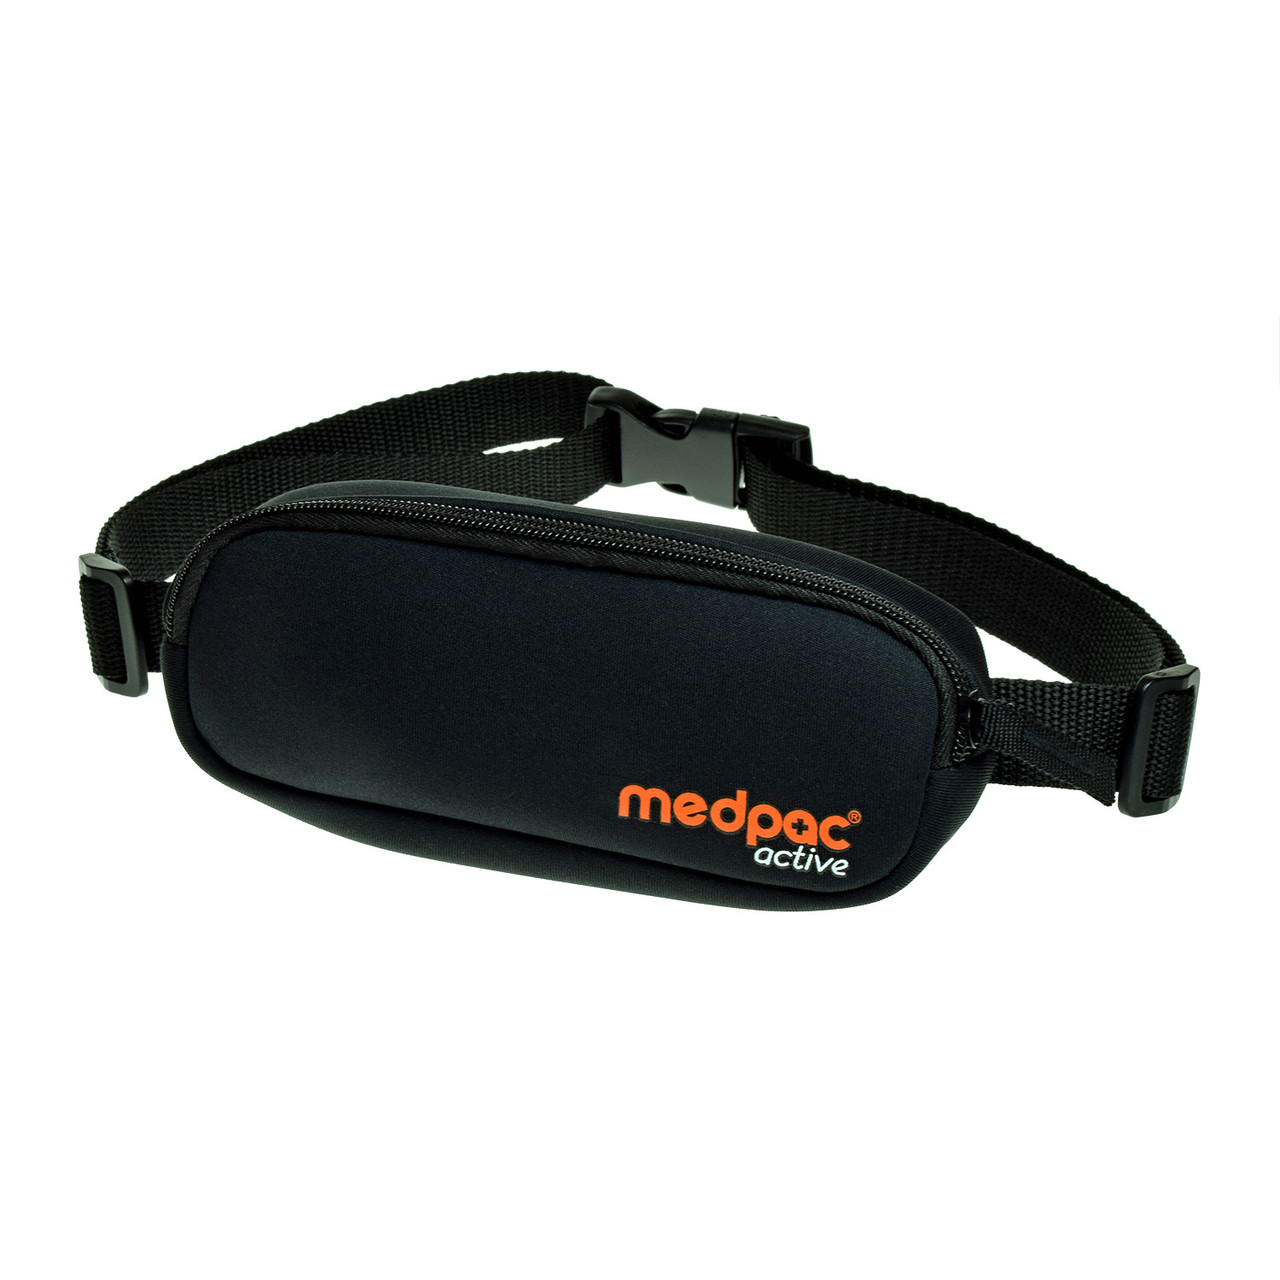 Medpac front 1500px for web 86162.1629767901